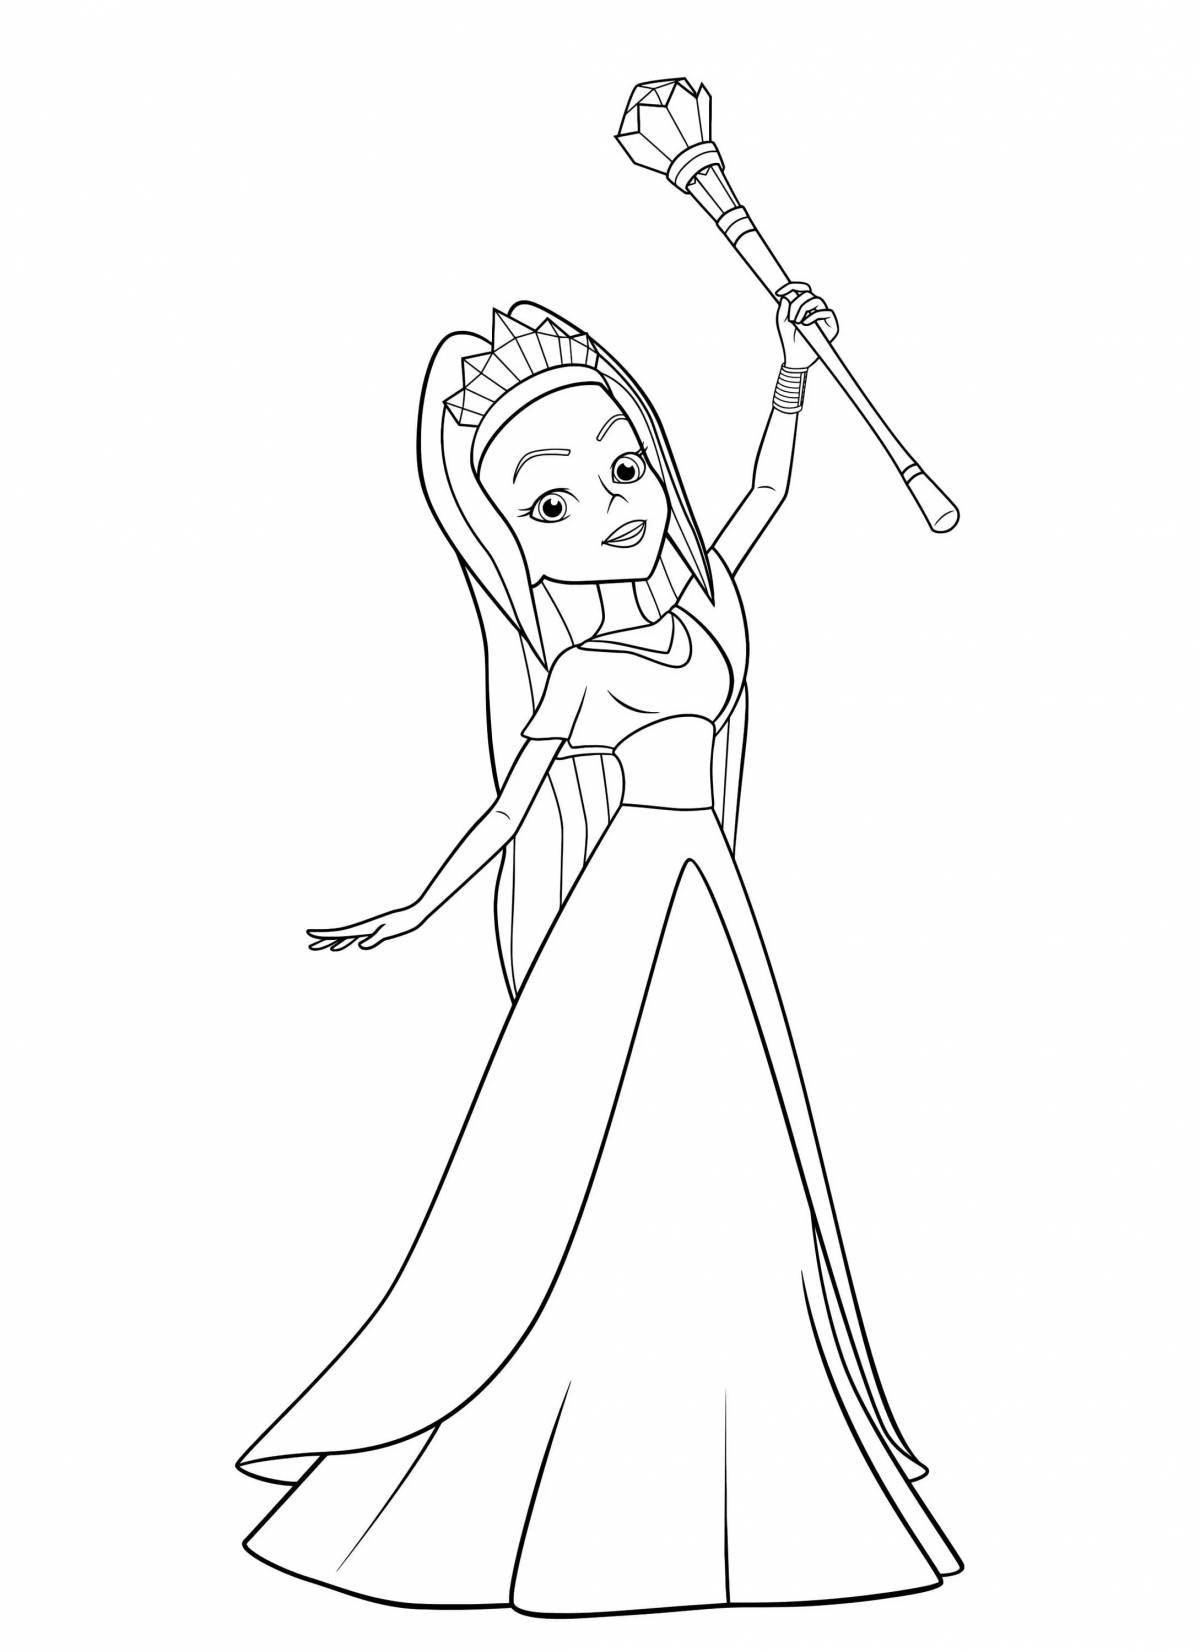 Coloring page amazing sorceress